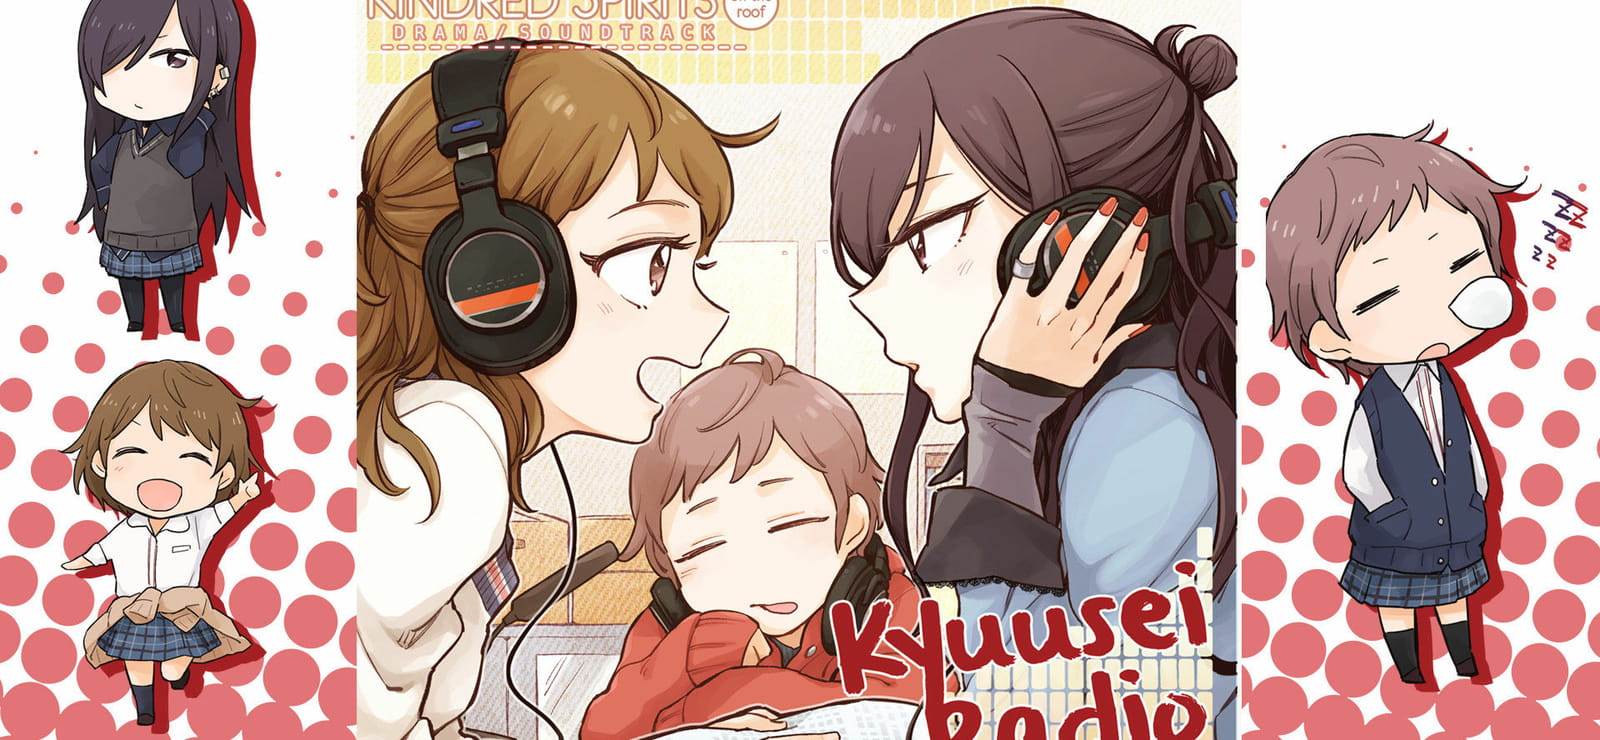 Kindred Spirits On The Roof Drama CD Vol.4